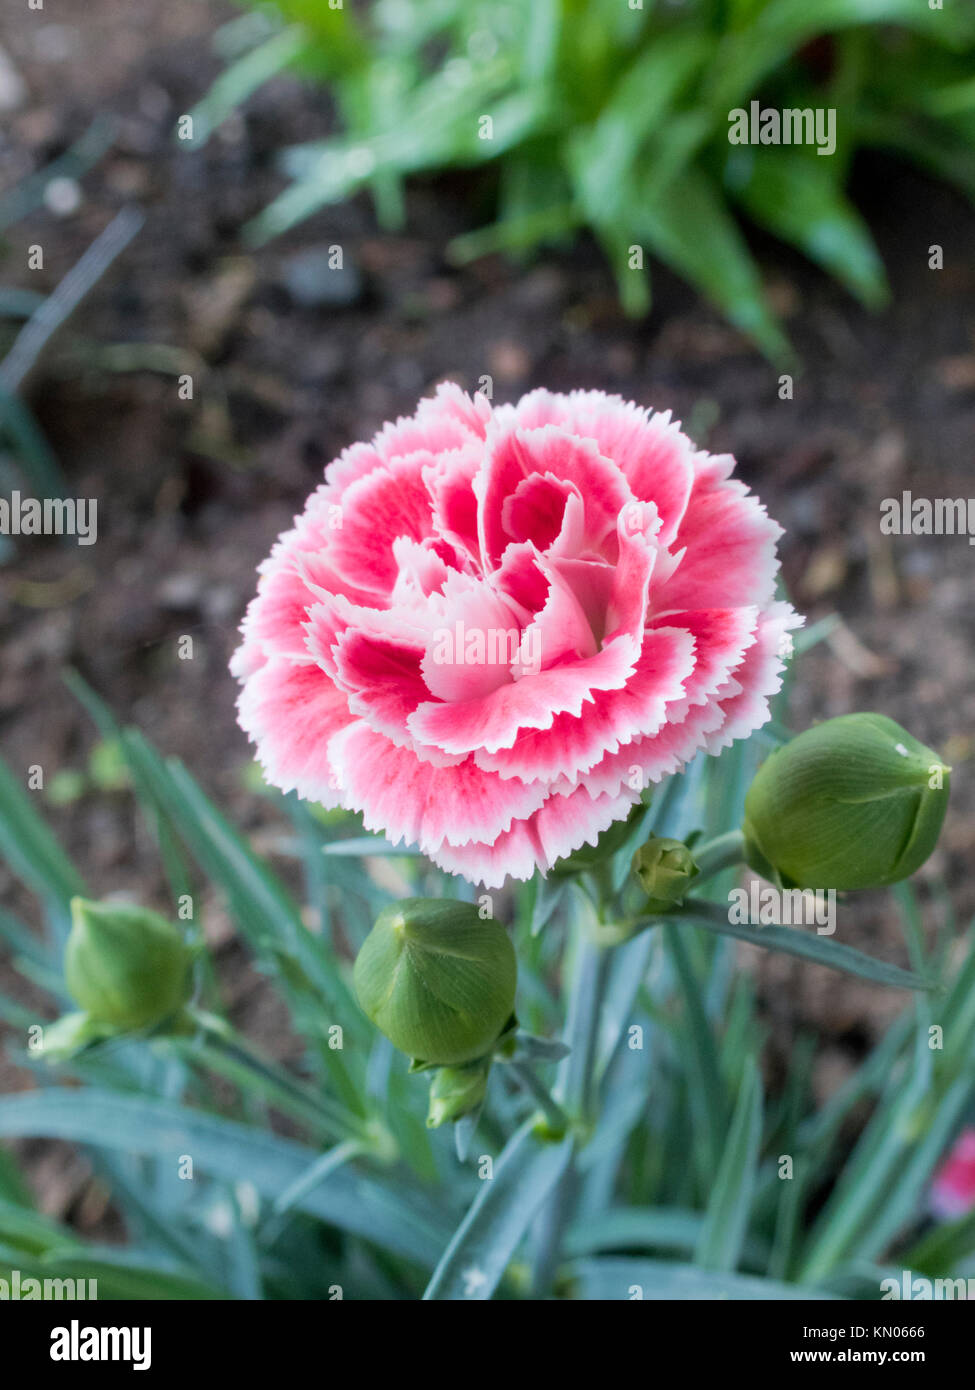 Dianthus Pinks 'Coral Reef' Plant in Flower During Summer Stock Photo